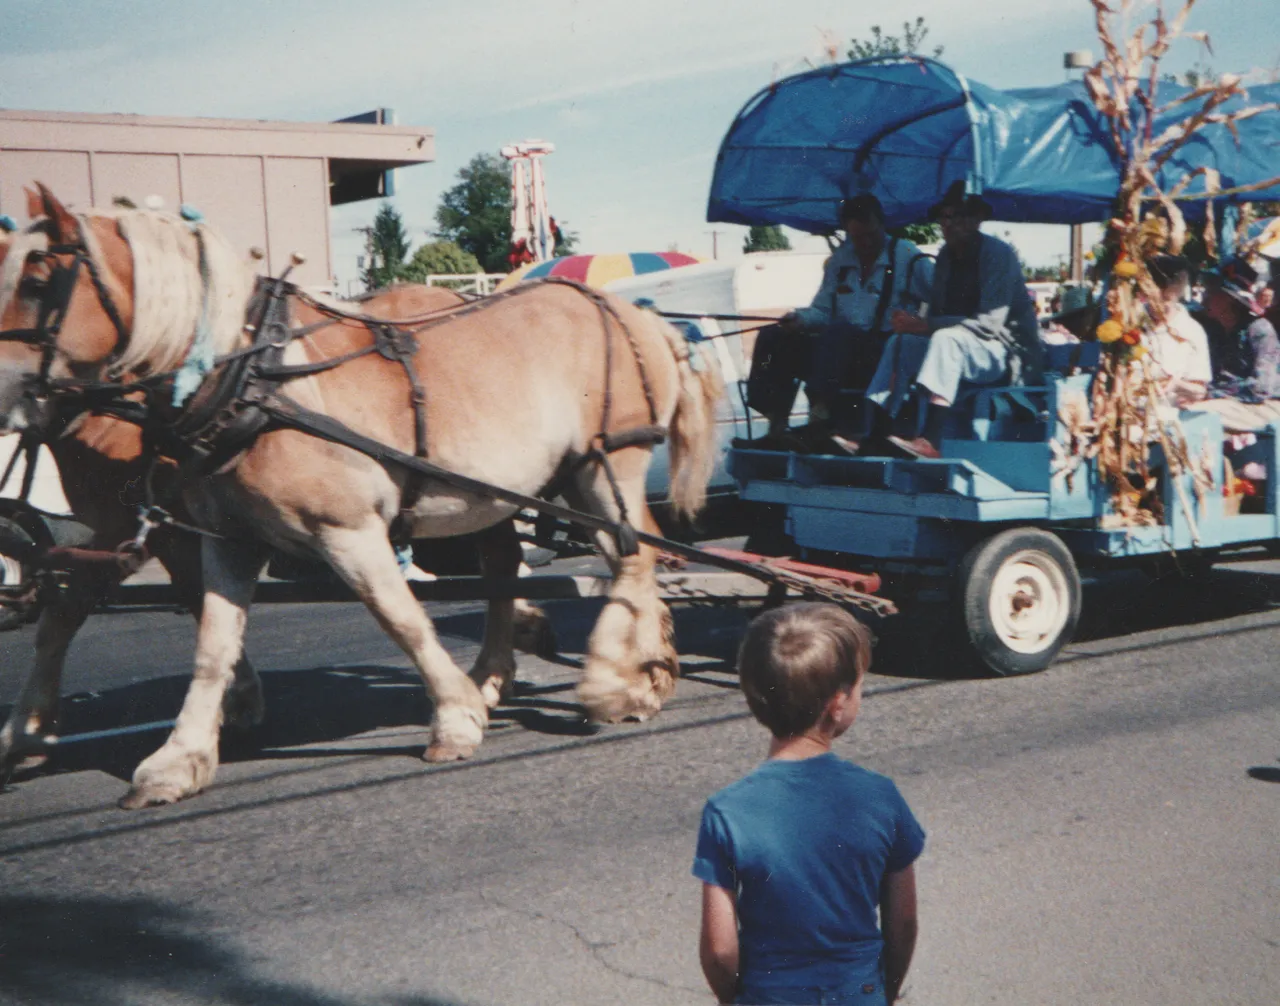 1992-09 - Fair in Forest Grove, parade, rides, Katie, Rick, Joey, Crystal, by Marilyn-08.png